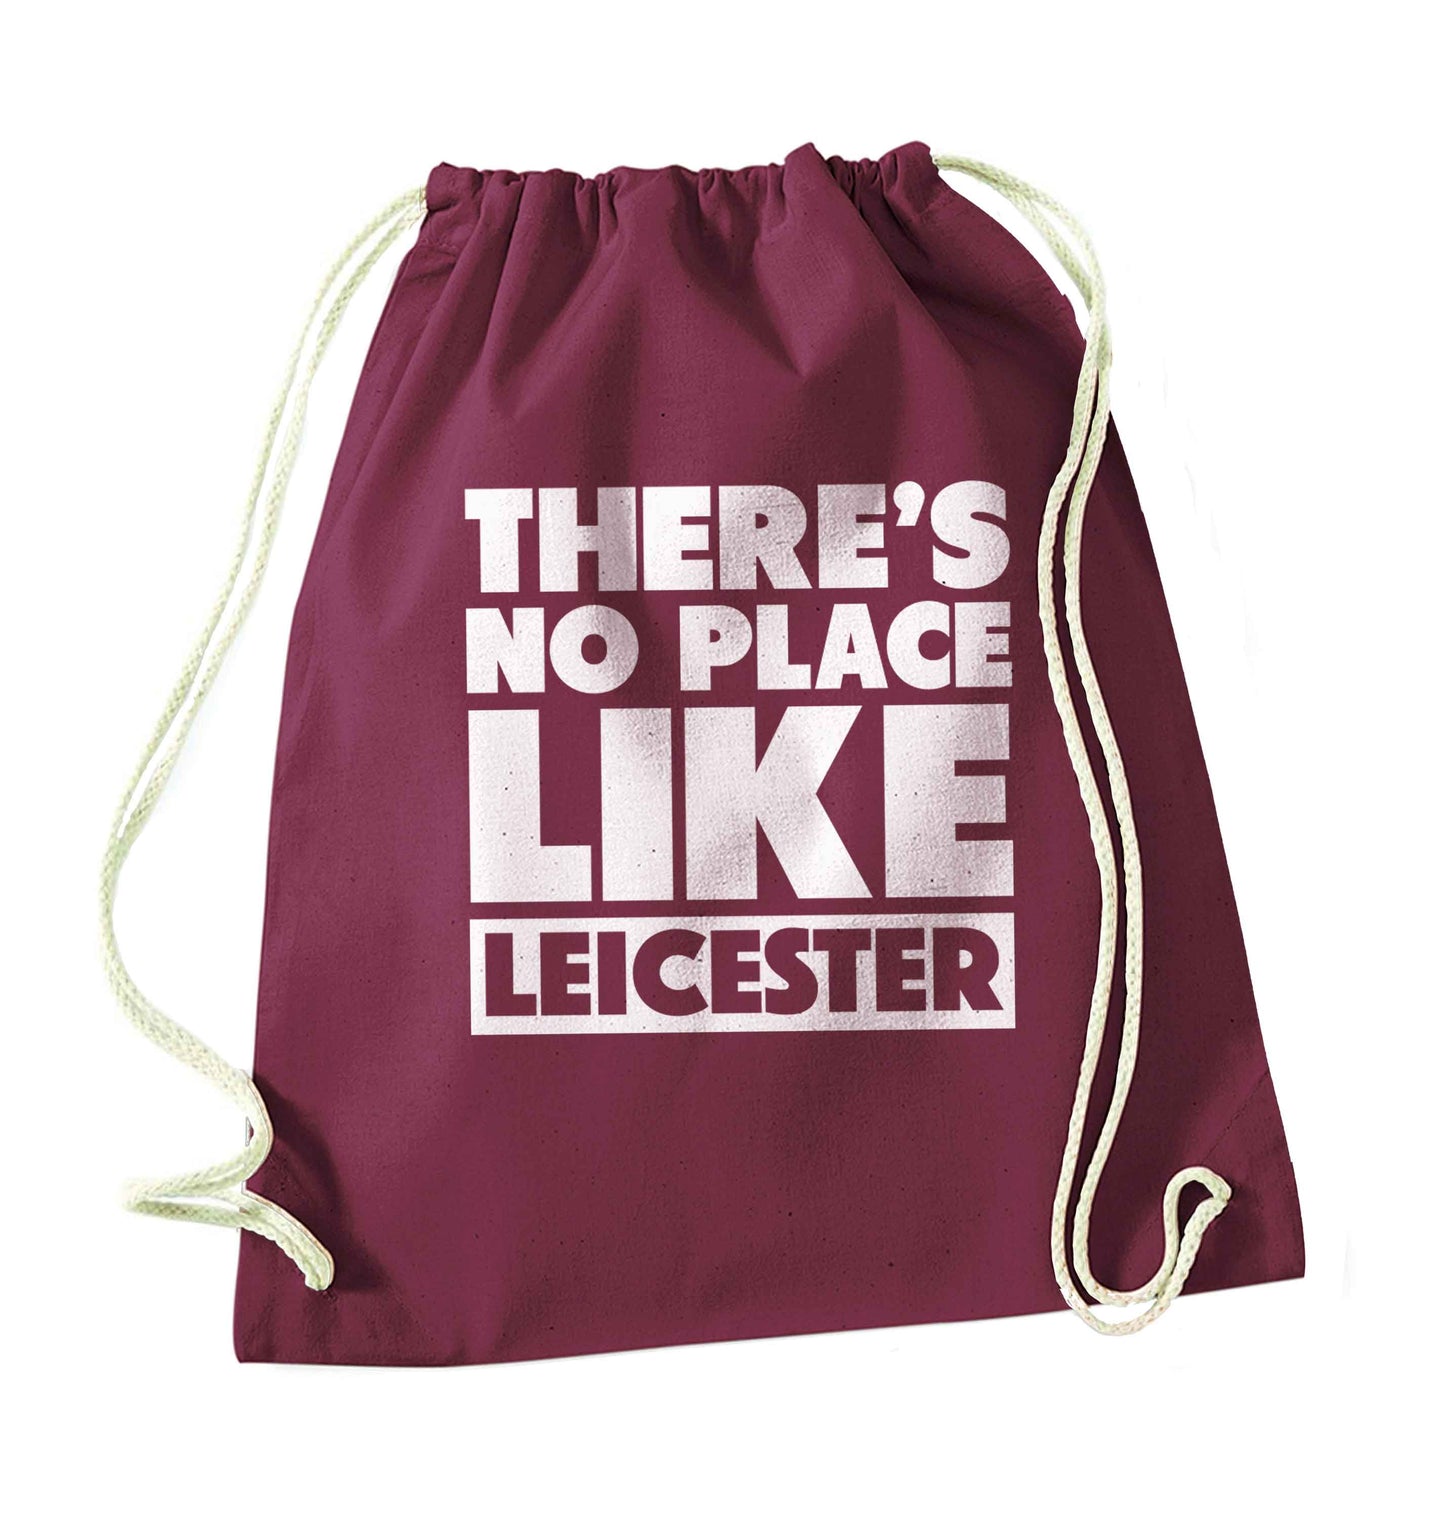 There's no place like Leicester maroon drawstring bag